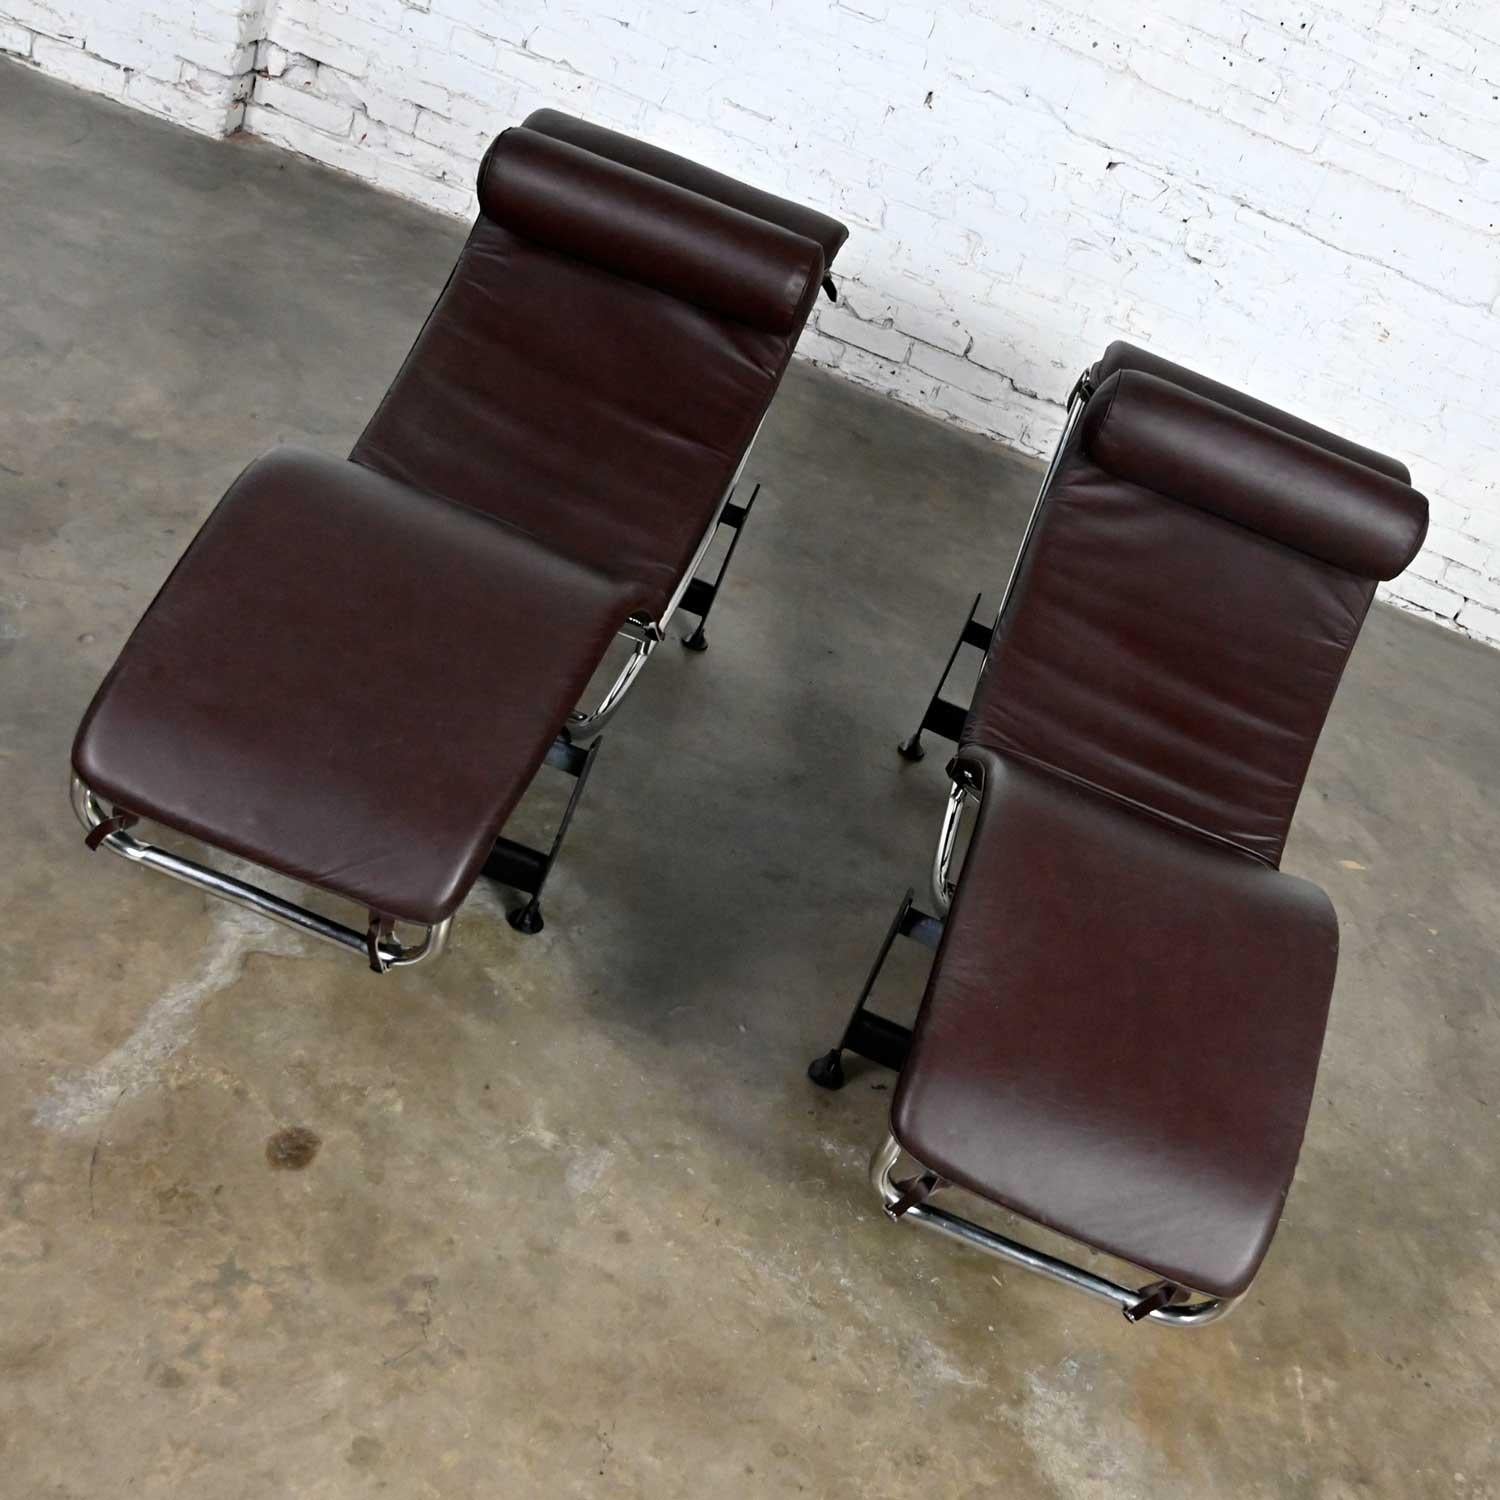 Bauhaus Pair Chaise Lounge Chairs Brown Leather & Chrome Style Le Corbusier LC4 For Sale